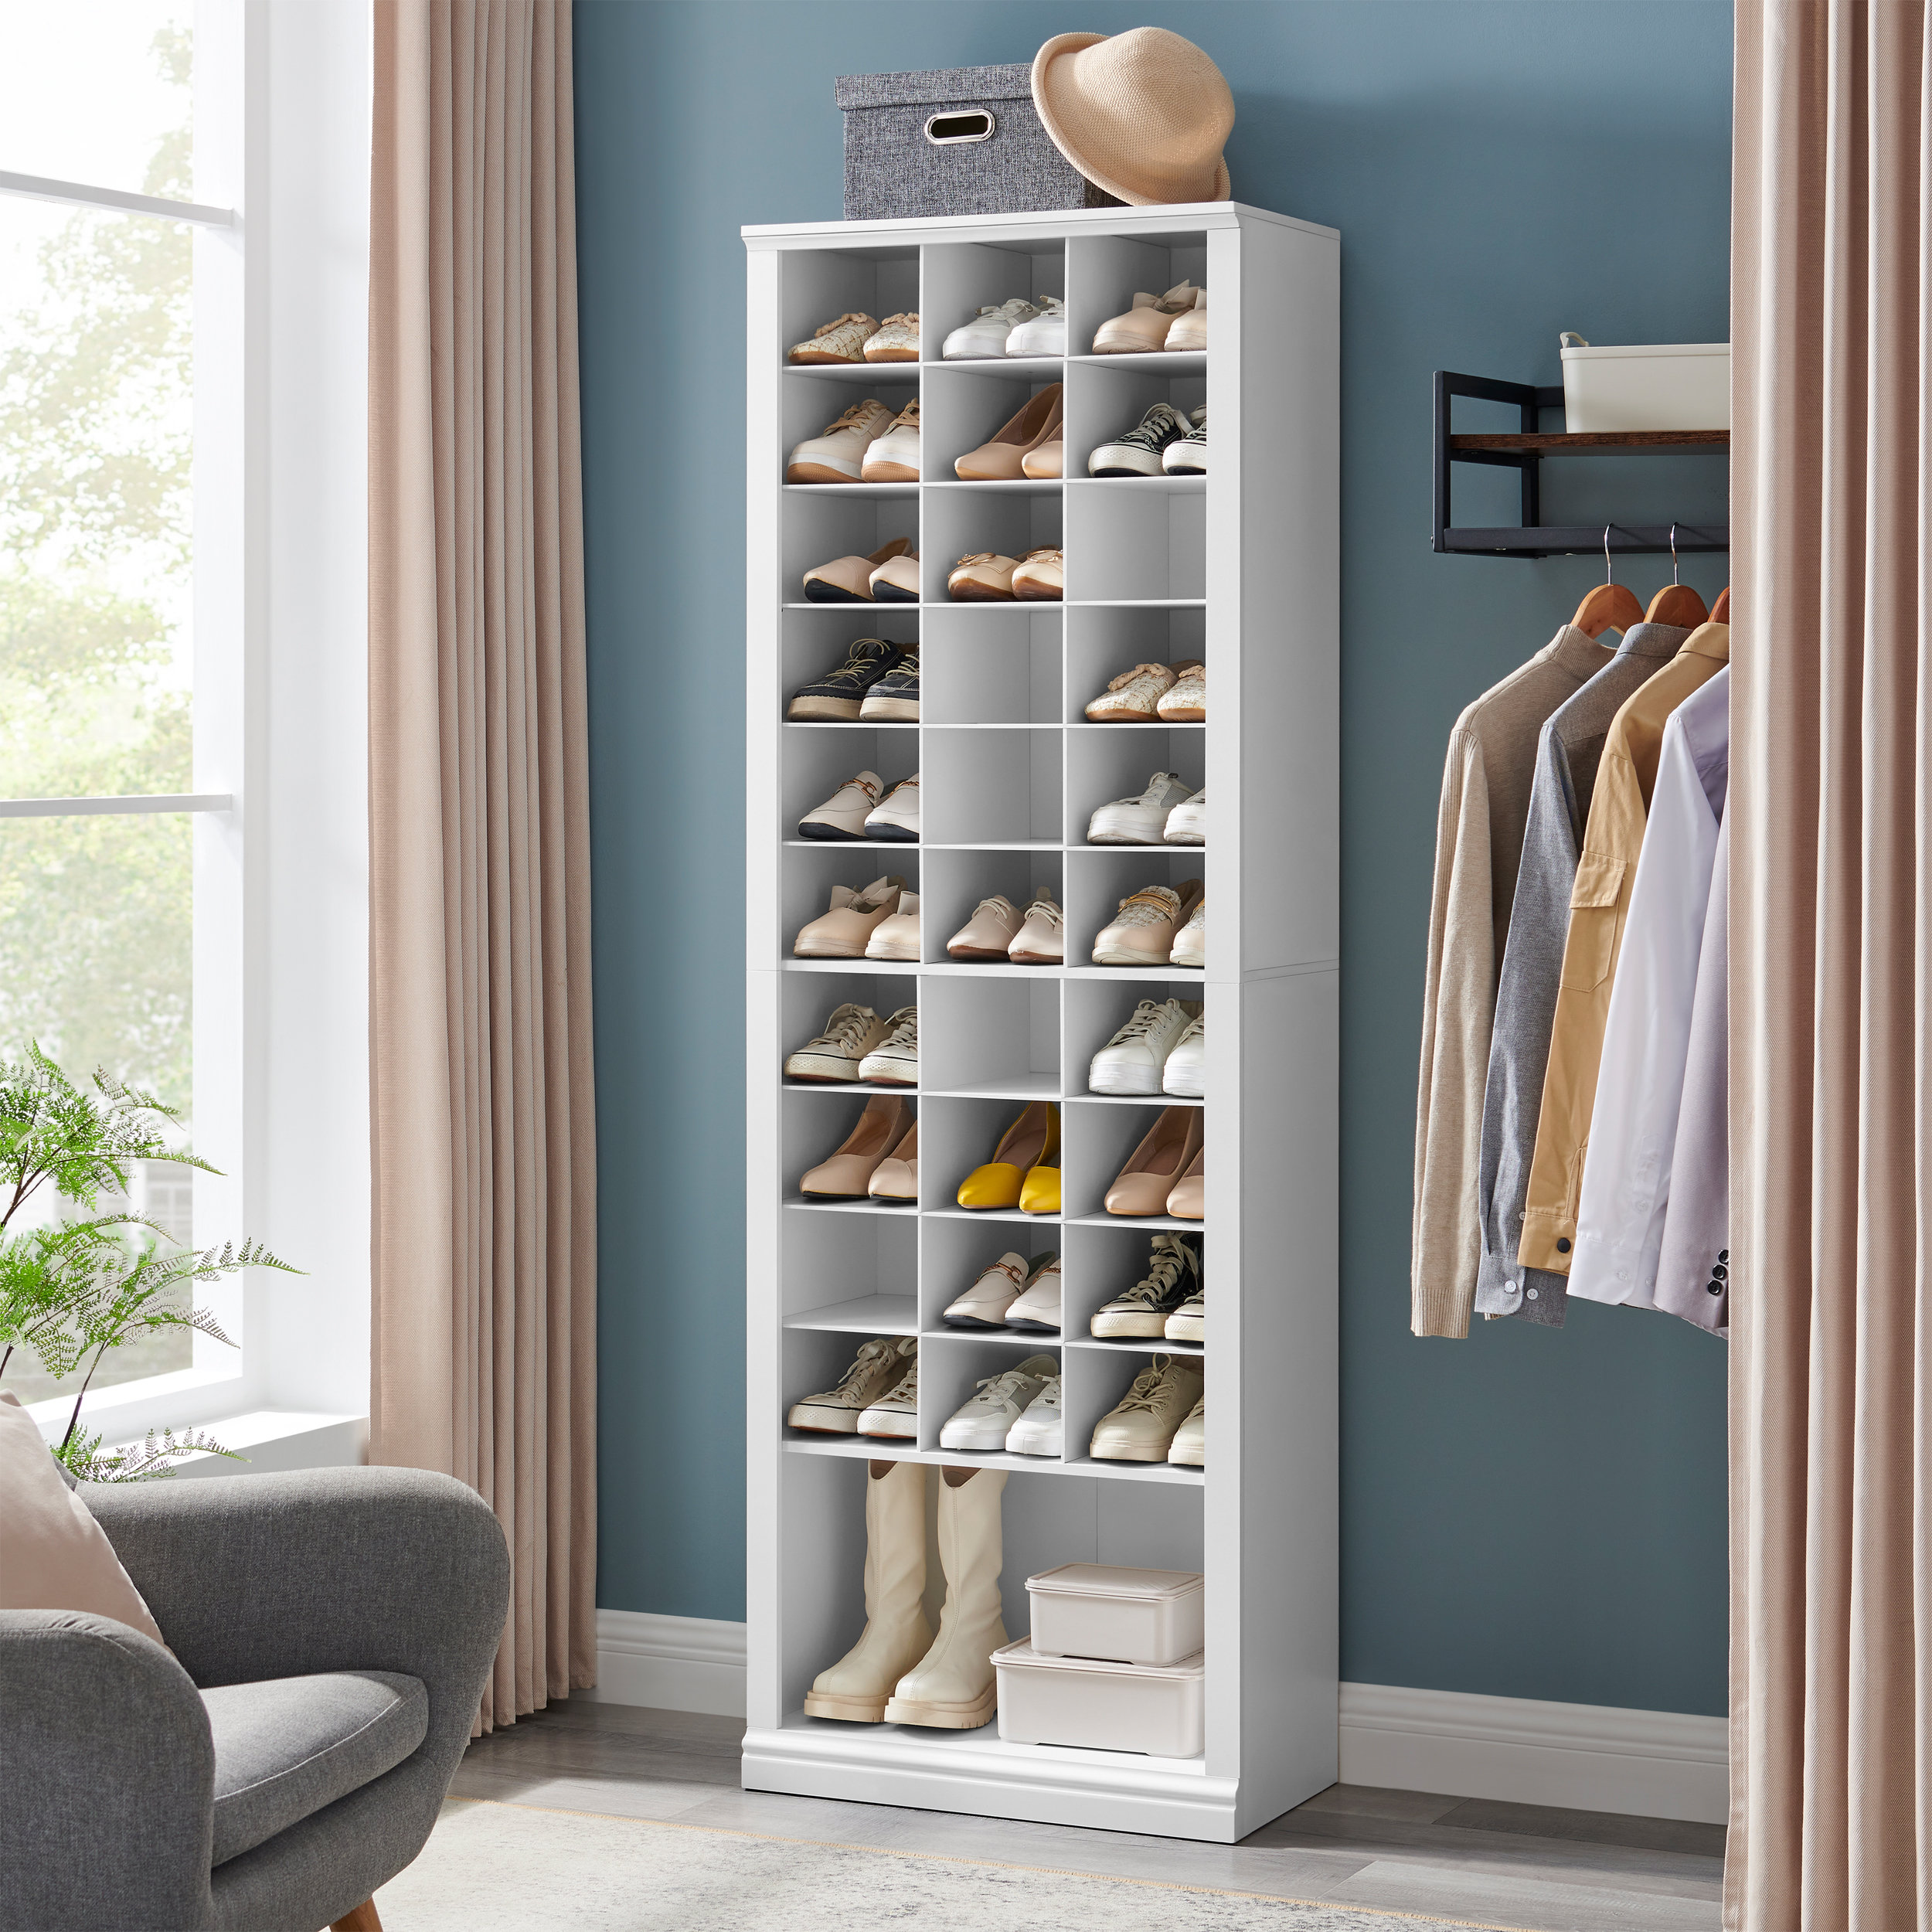 White Swivel Shoe Cabinet with 1 Door Modern Entryway Shoe Storage Cabinet  in Small